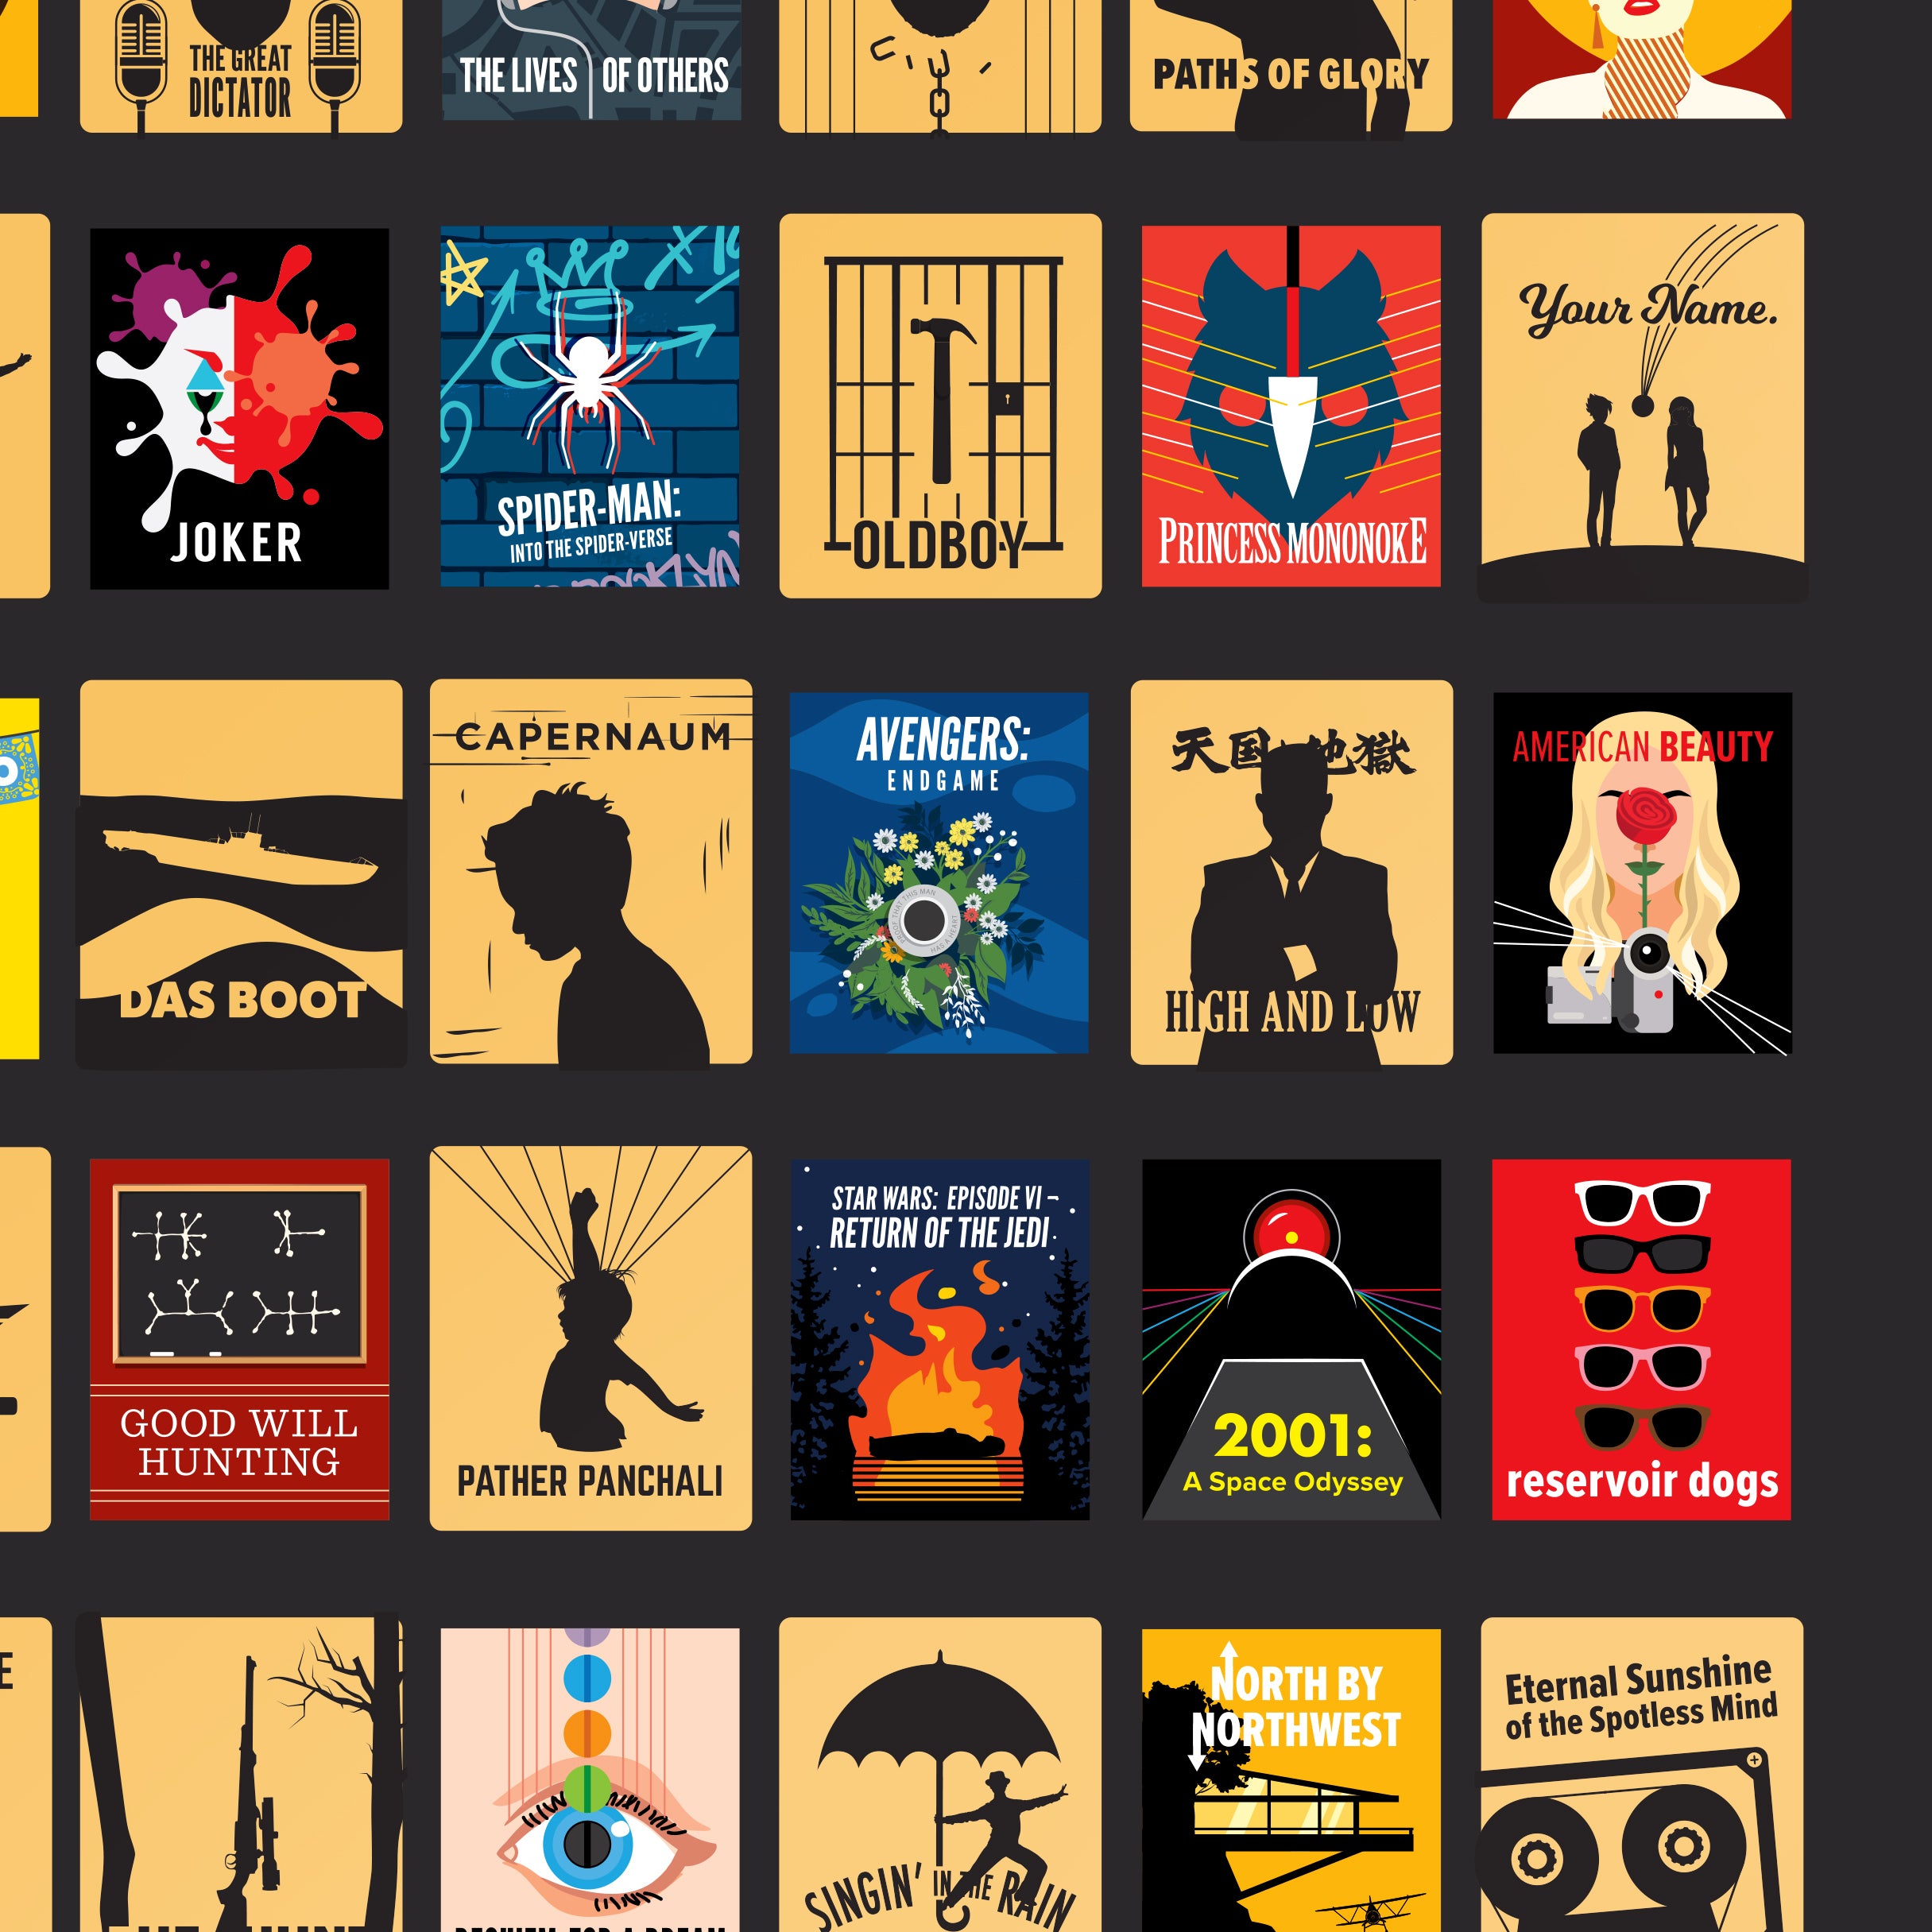  Official IMDb Top 100 Movies Scratch Off Poster